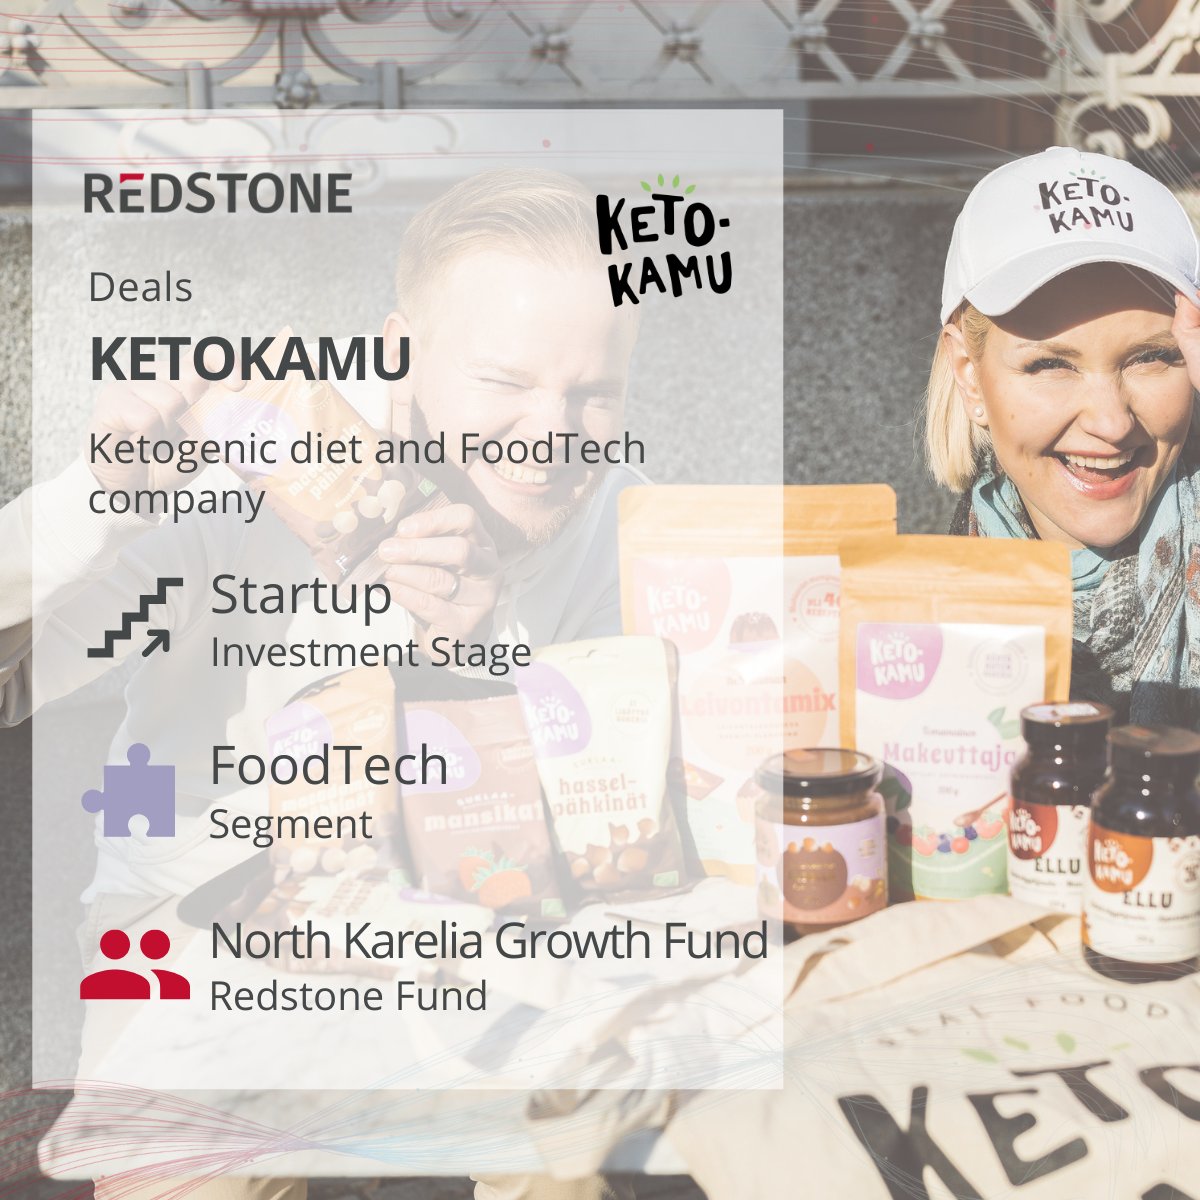 We are excited to announce our latest investment to Redstone’s Portfolio! Redstone’s North Karelia Growth Fund has made an investment in a Finnish new age Food Tech company called Ketokamu. Welcome to the family! #vc #Investment #portfolio #foodtech